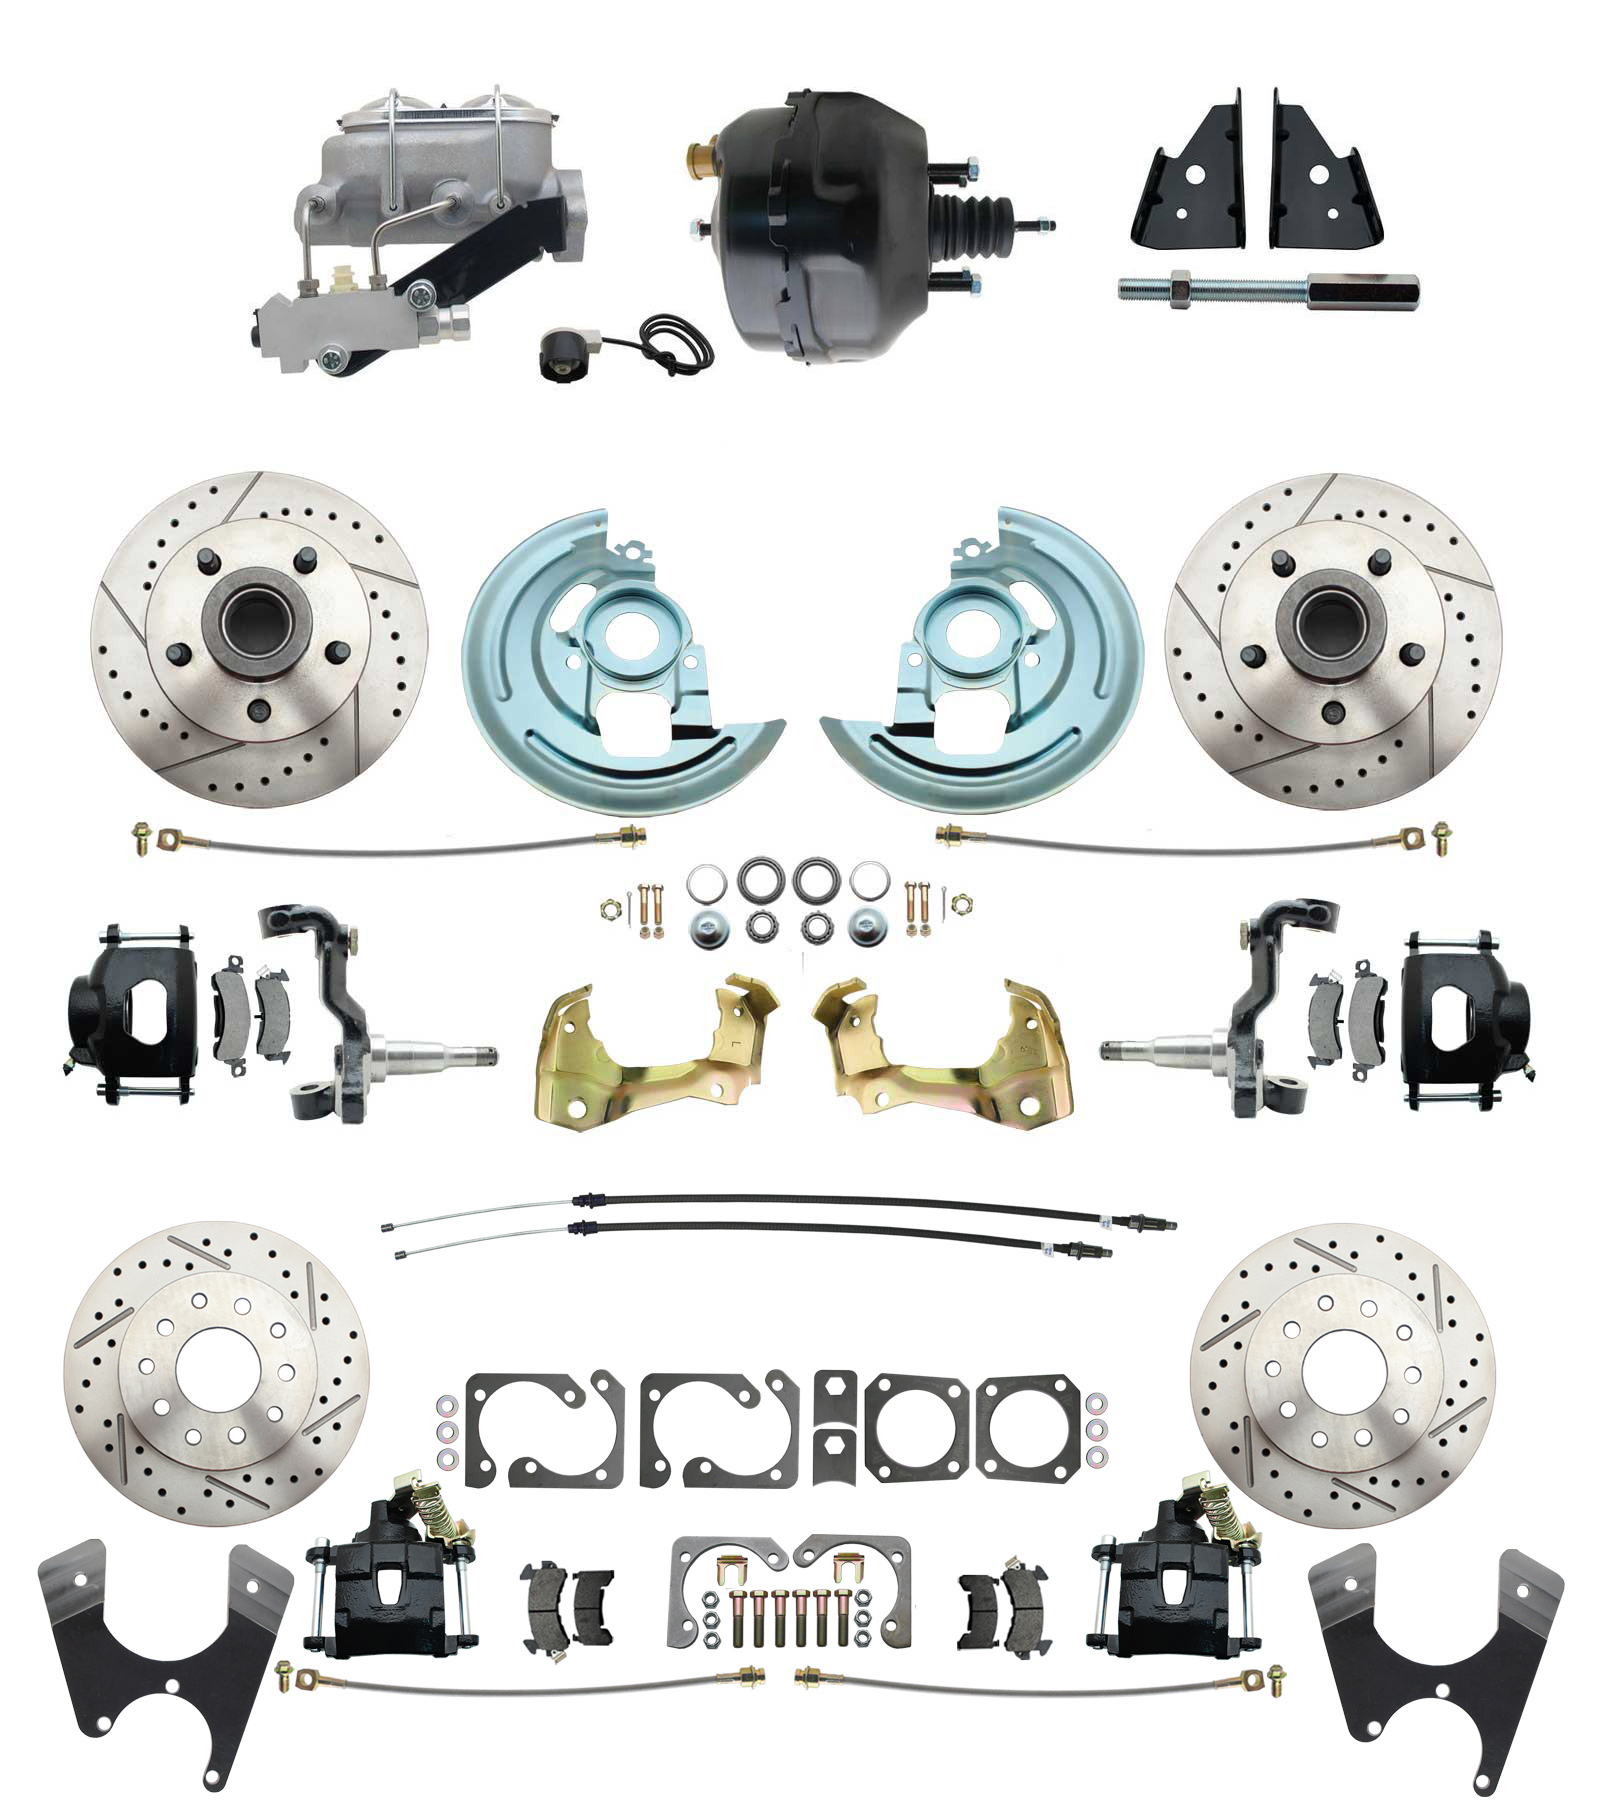 1967-1969 Camaro/ Firebird & 1968-1974 Chevy Nova Front & Rear Power Disc Brake Conversion Kit Drilled & Slotted & Powder Coated Black Calipers Rotors 9 Dual Powder Coated Black Booster Kit